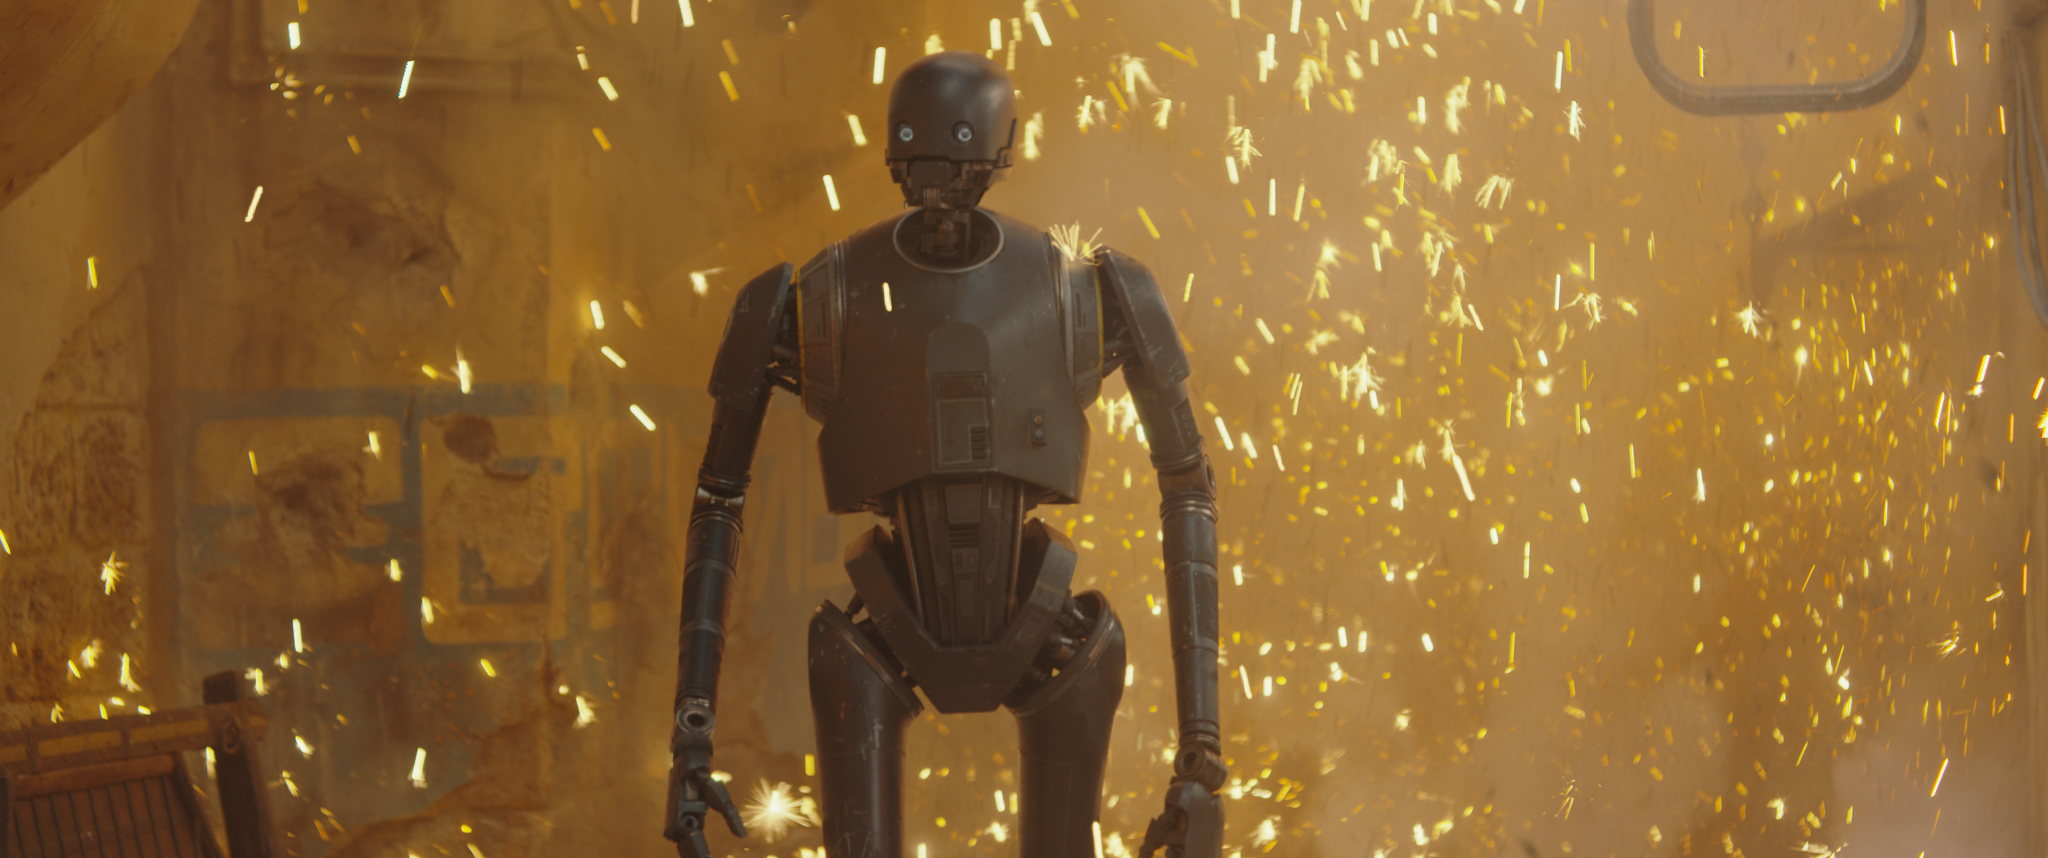 K-2SO Star Wars Rogue One